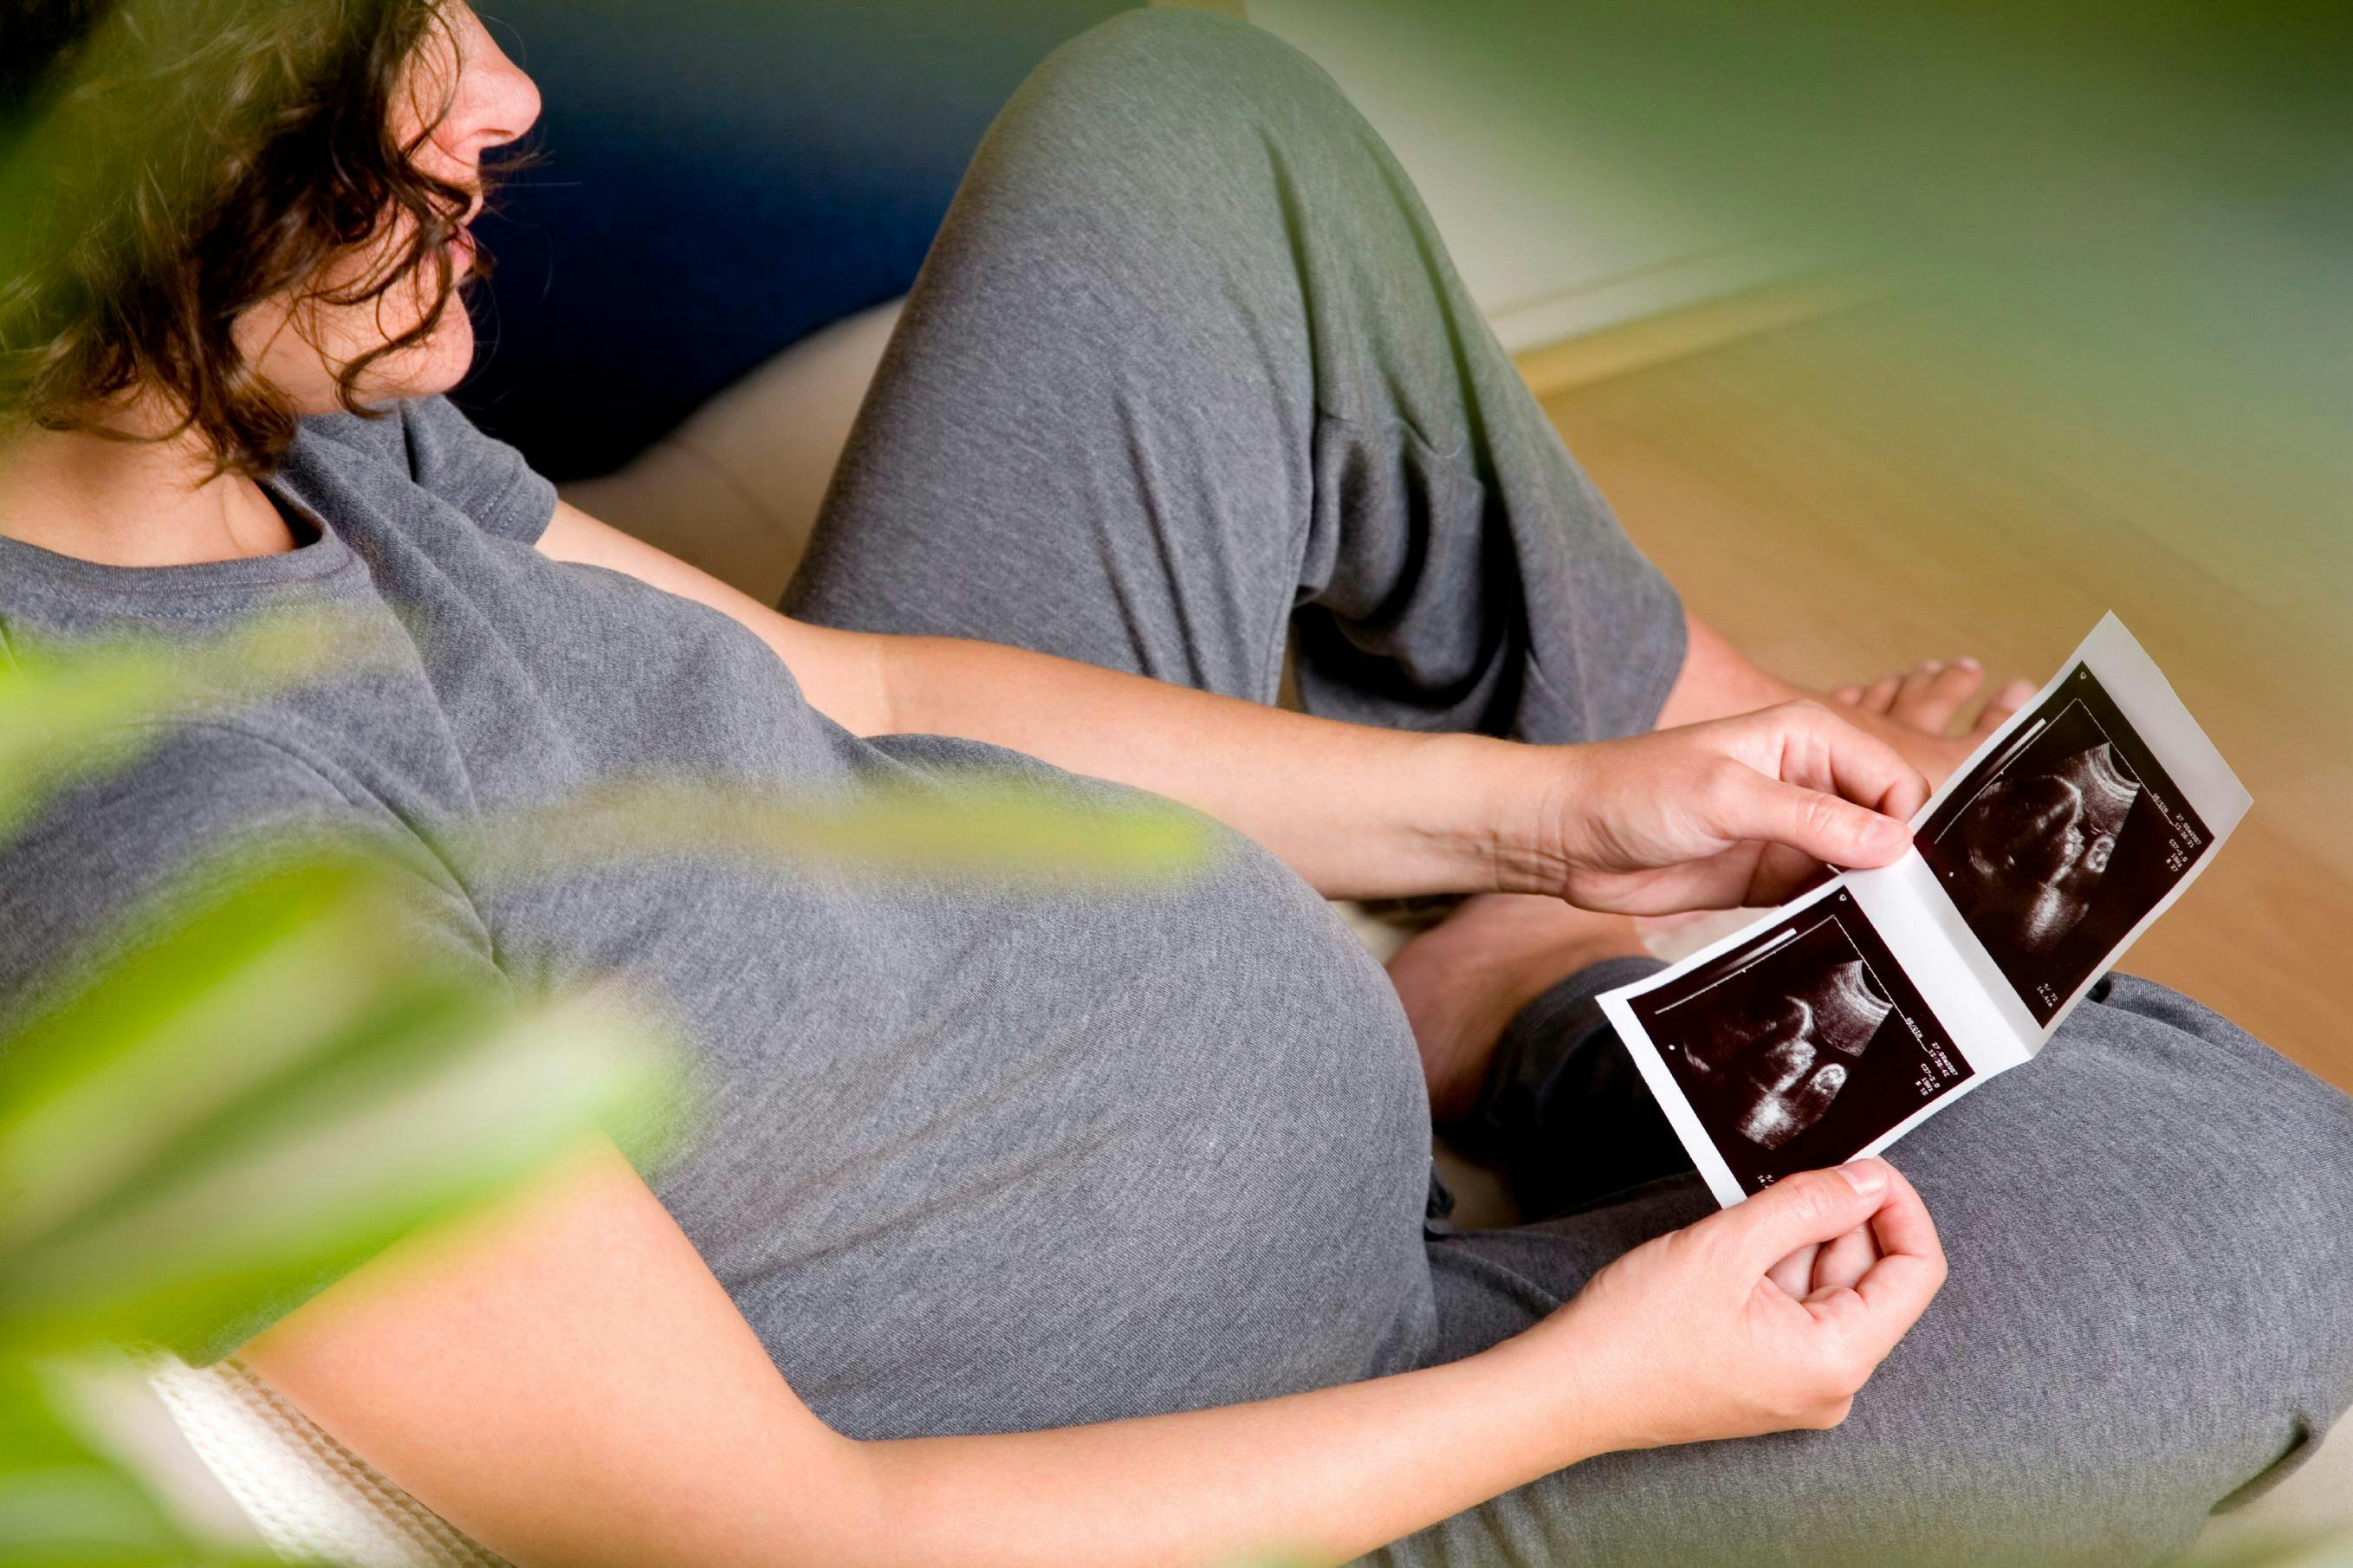 Pregnant woman looking at ultrasound photos